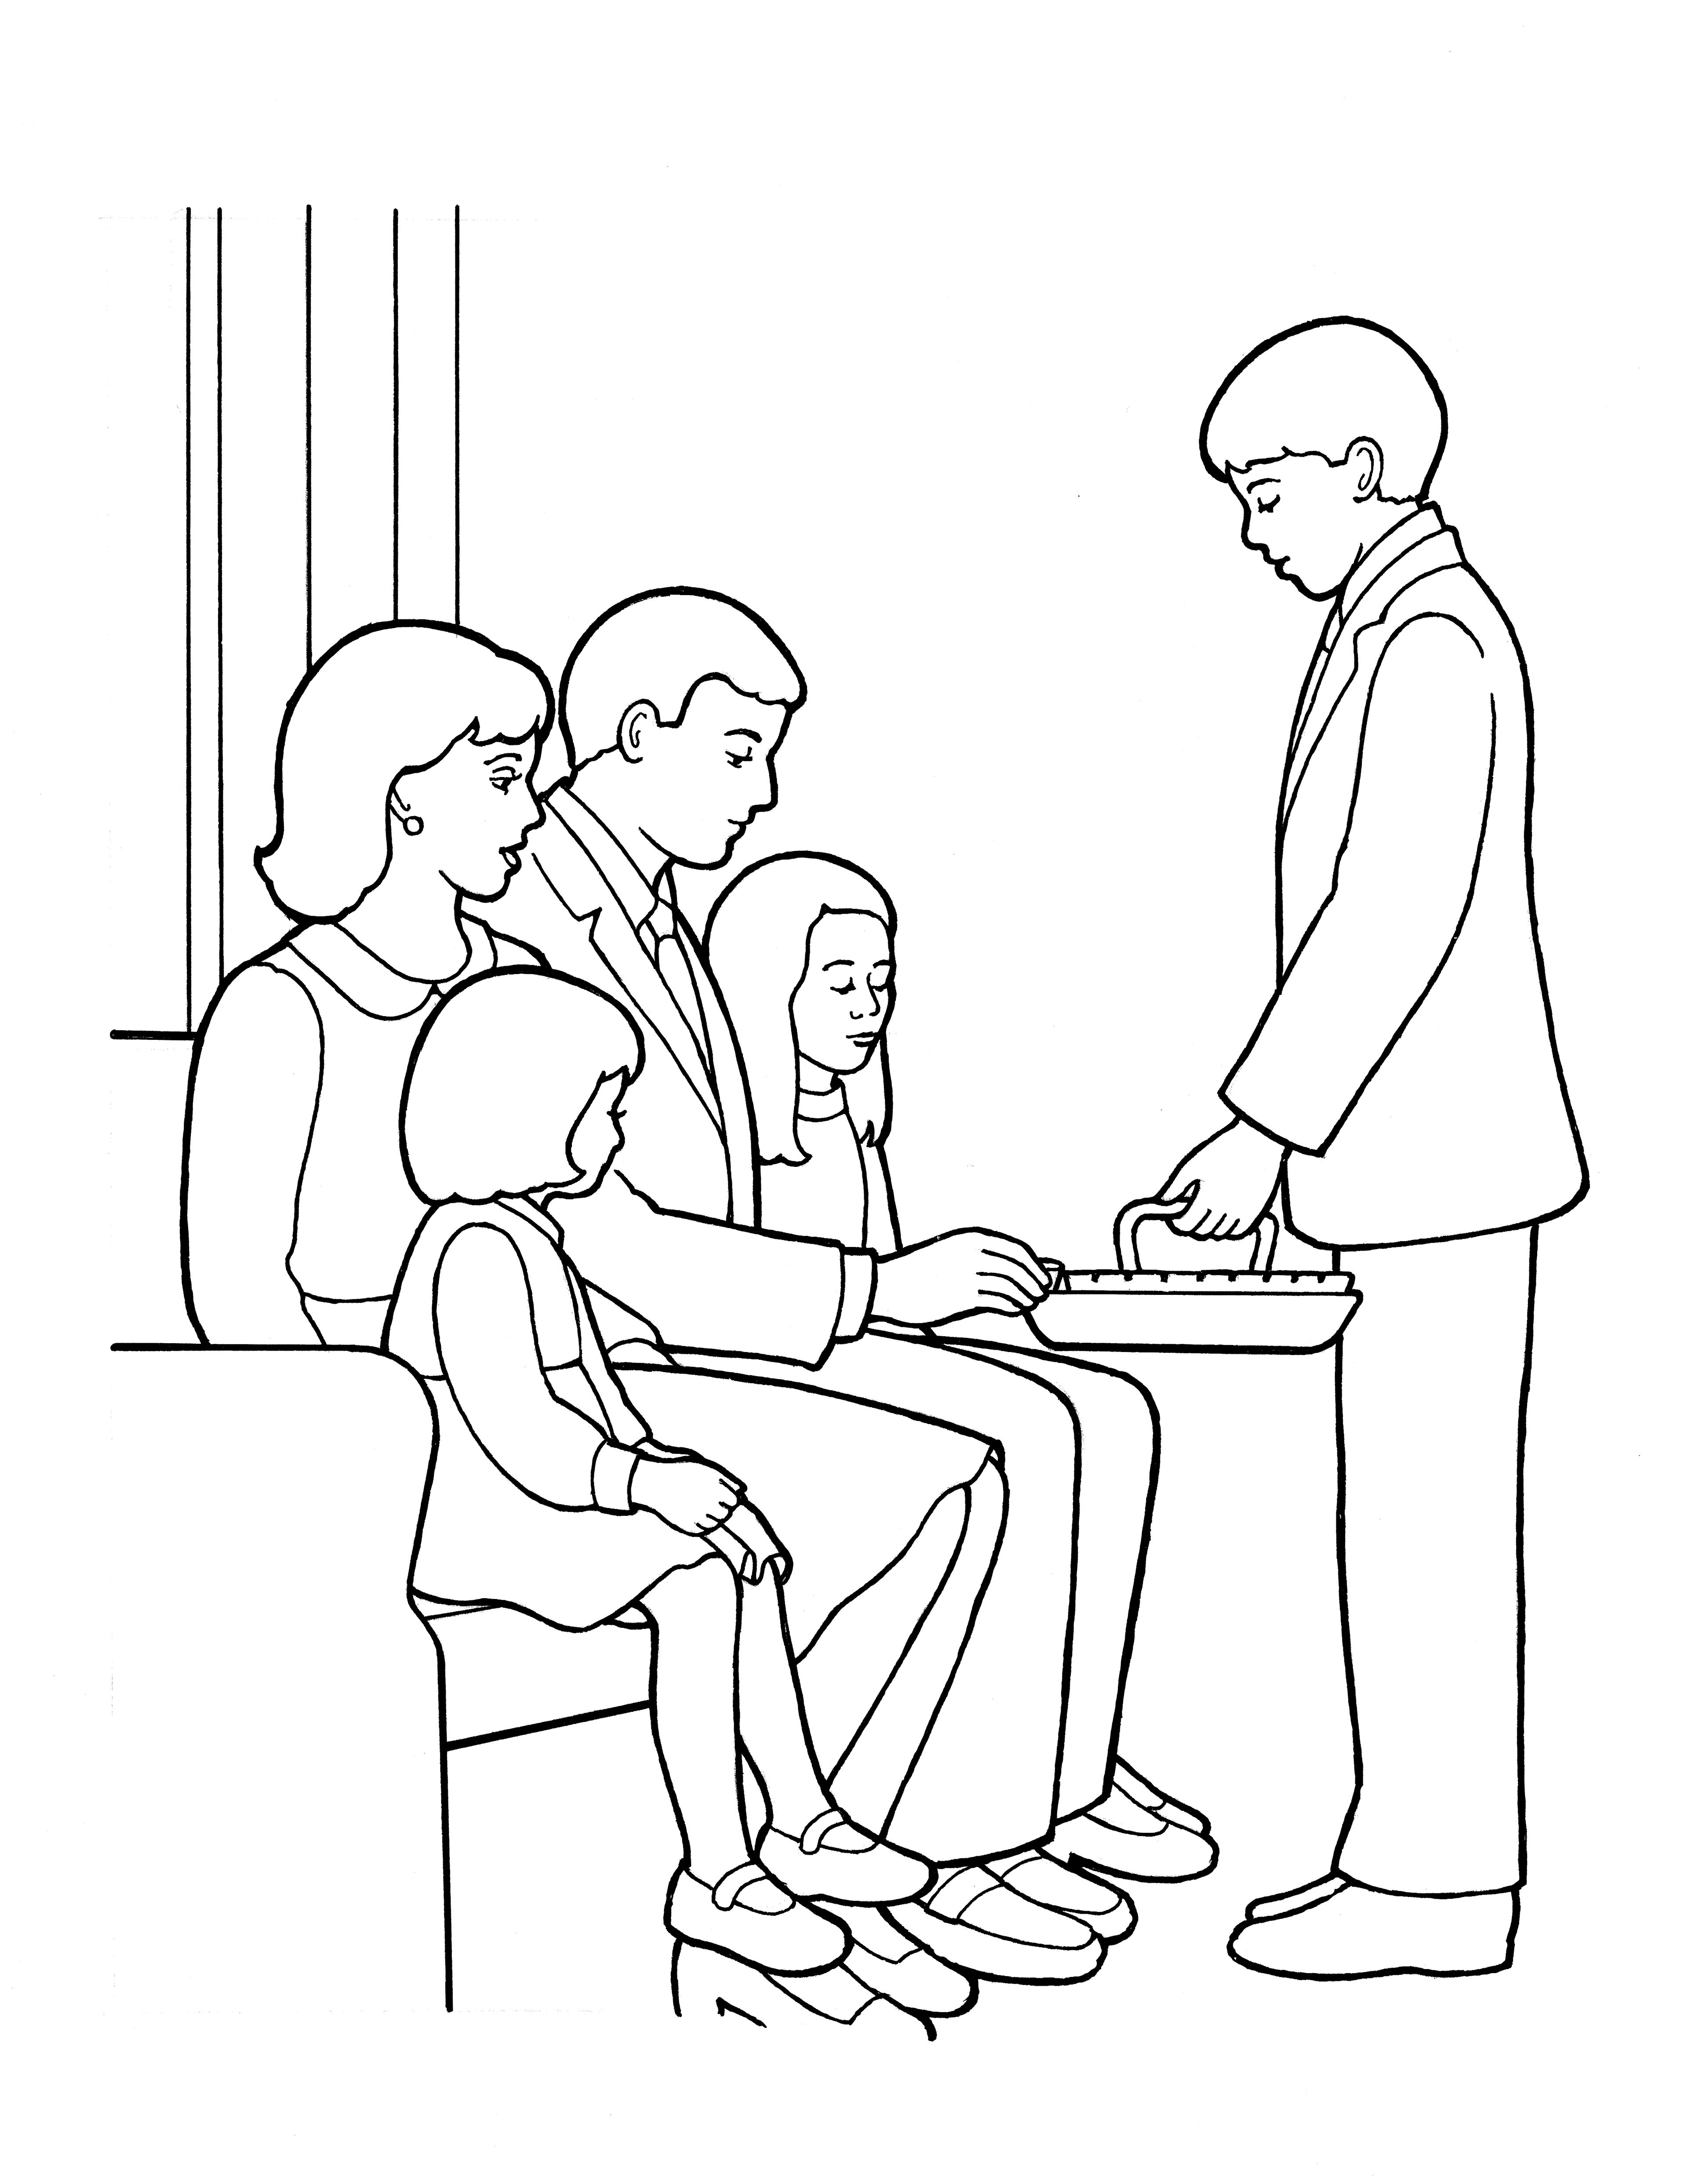 An illustration of a deacon passing the sacrament, from the nursery manual Behold Your Little Ones (2008), page 119.